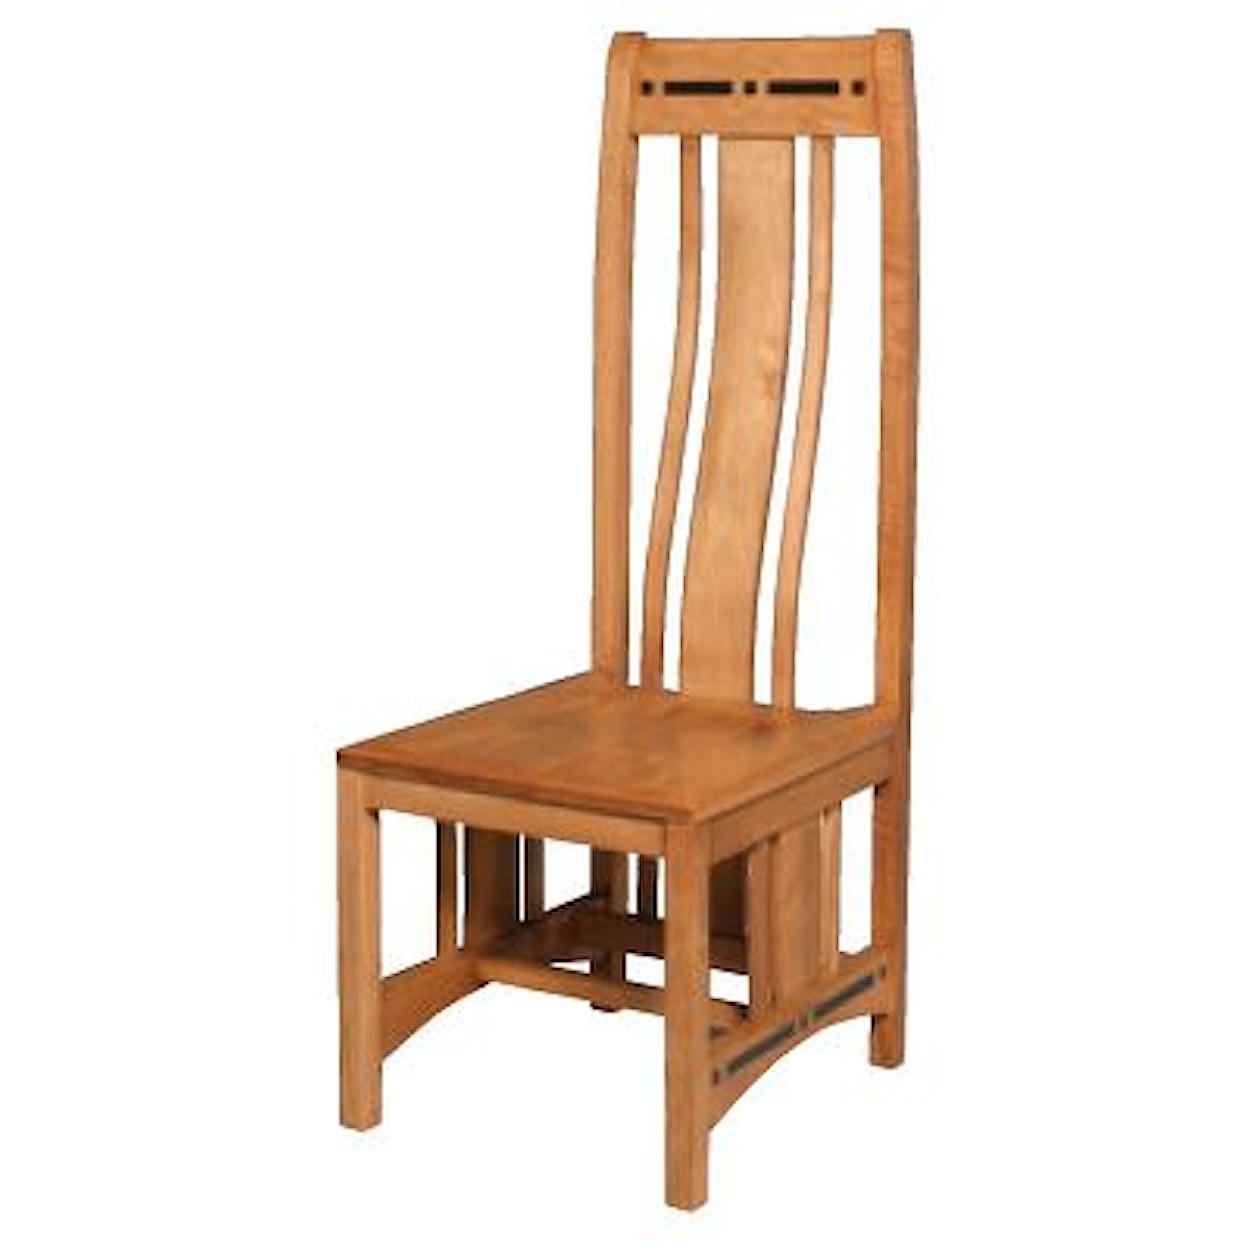 Simply Amish Aspen Wood Seat Aspen Side Chair